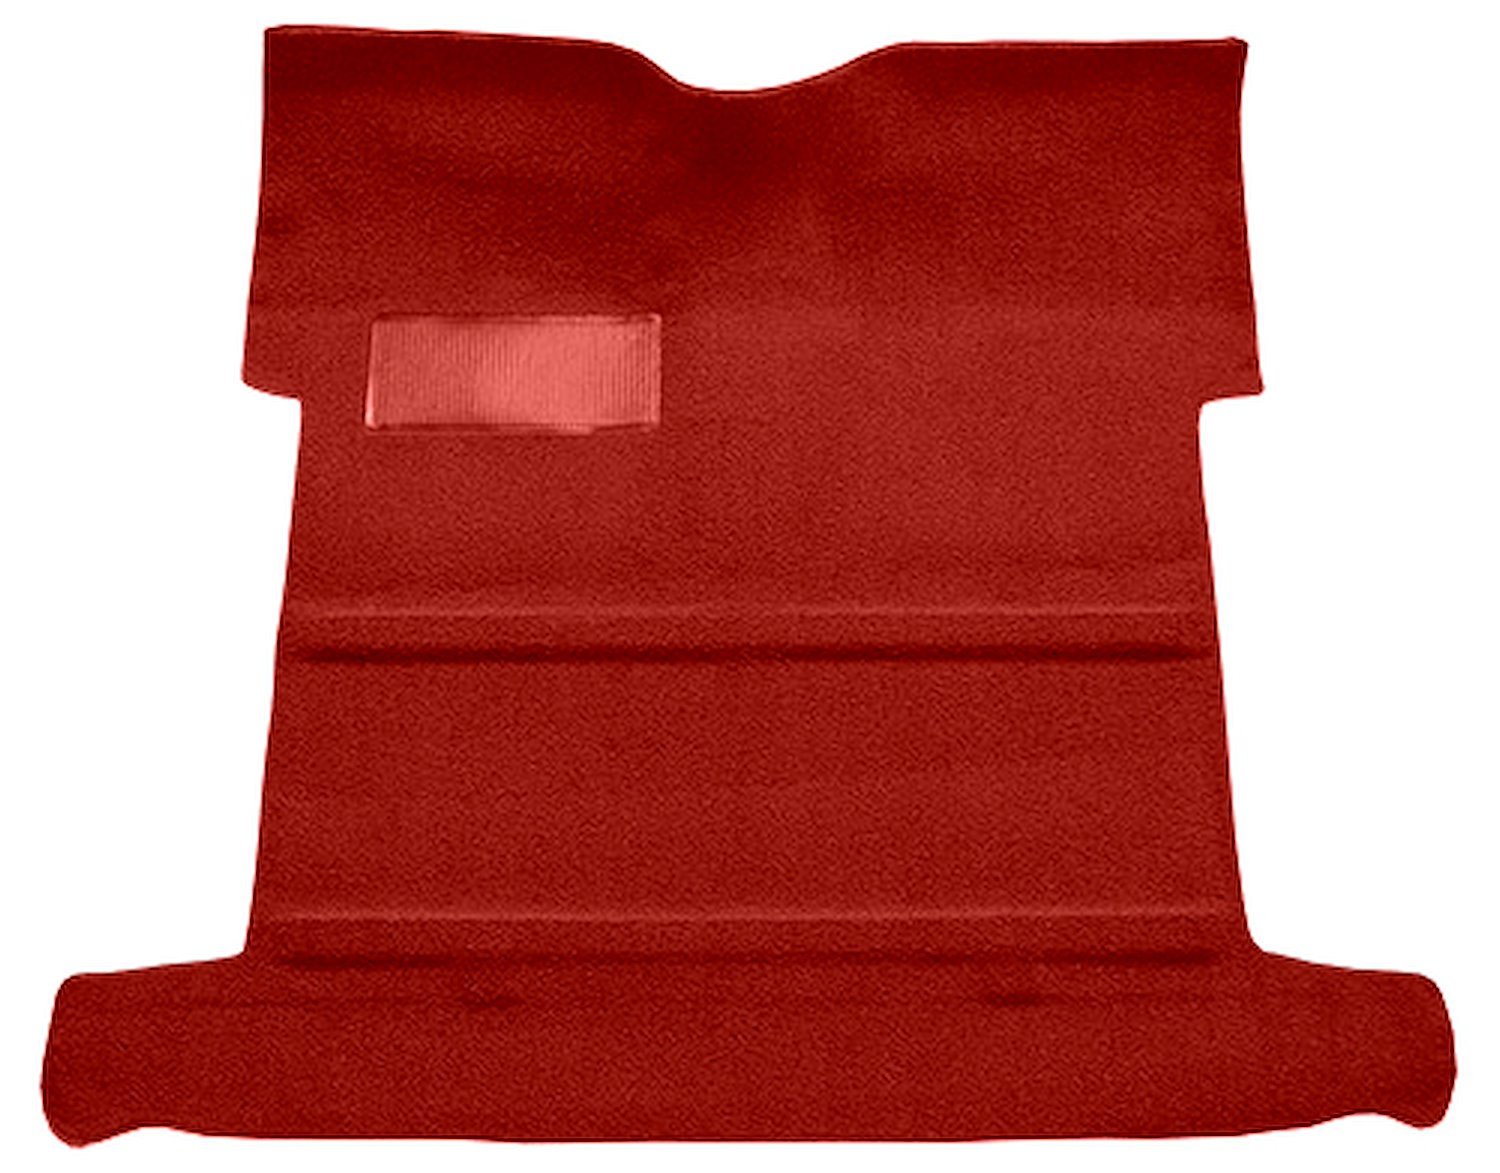 Molded Loop Carpet for 1959 GM 3100 Regular Cab Trucks w/High Tunnel [Mass Backing, Red]